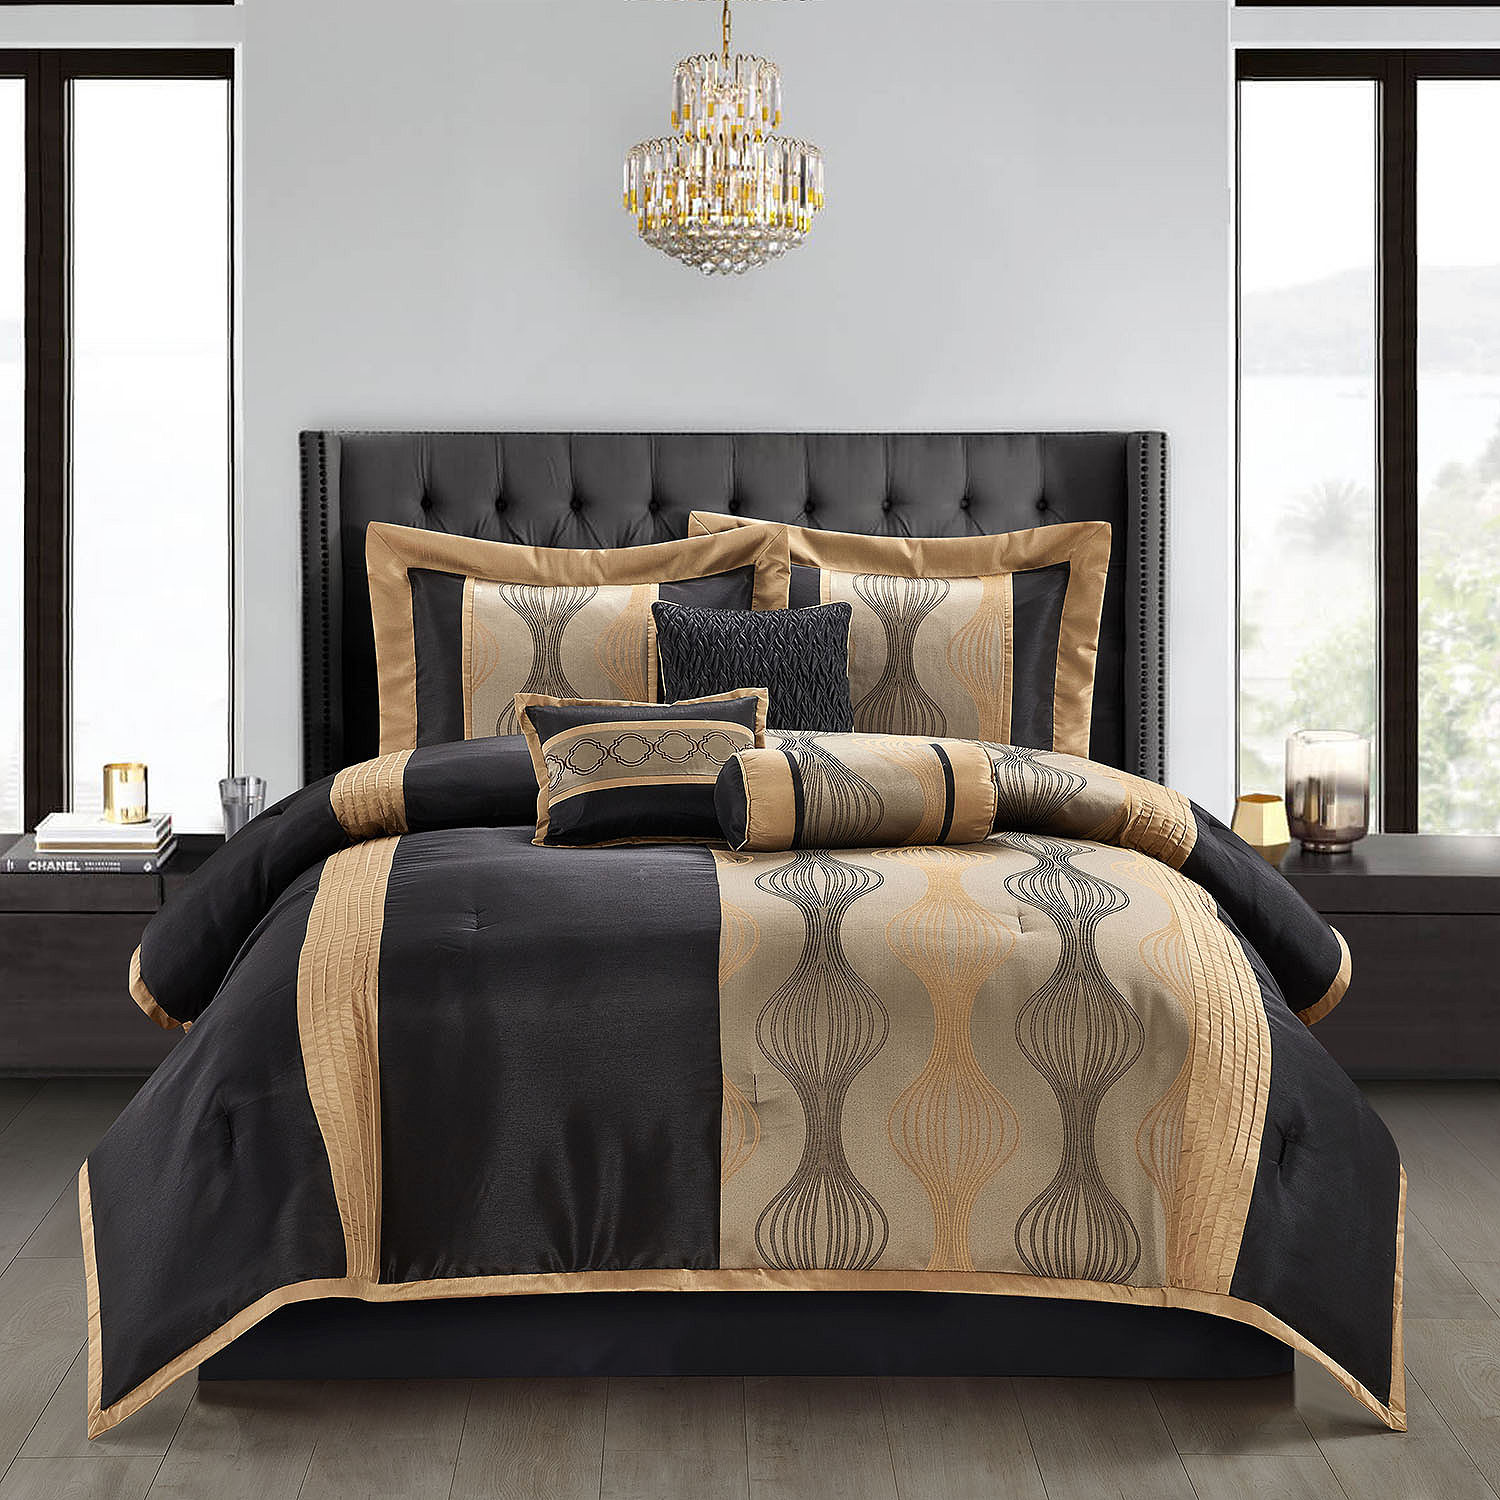 Stratford Park Neve Midweight Complete Bedding Set - JCPenney